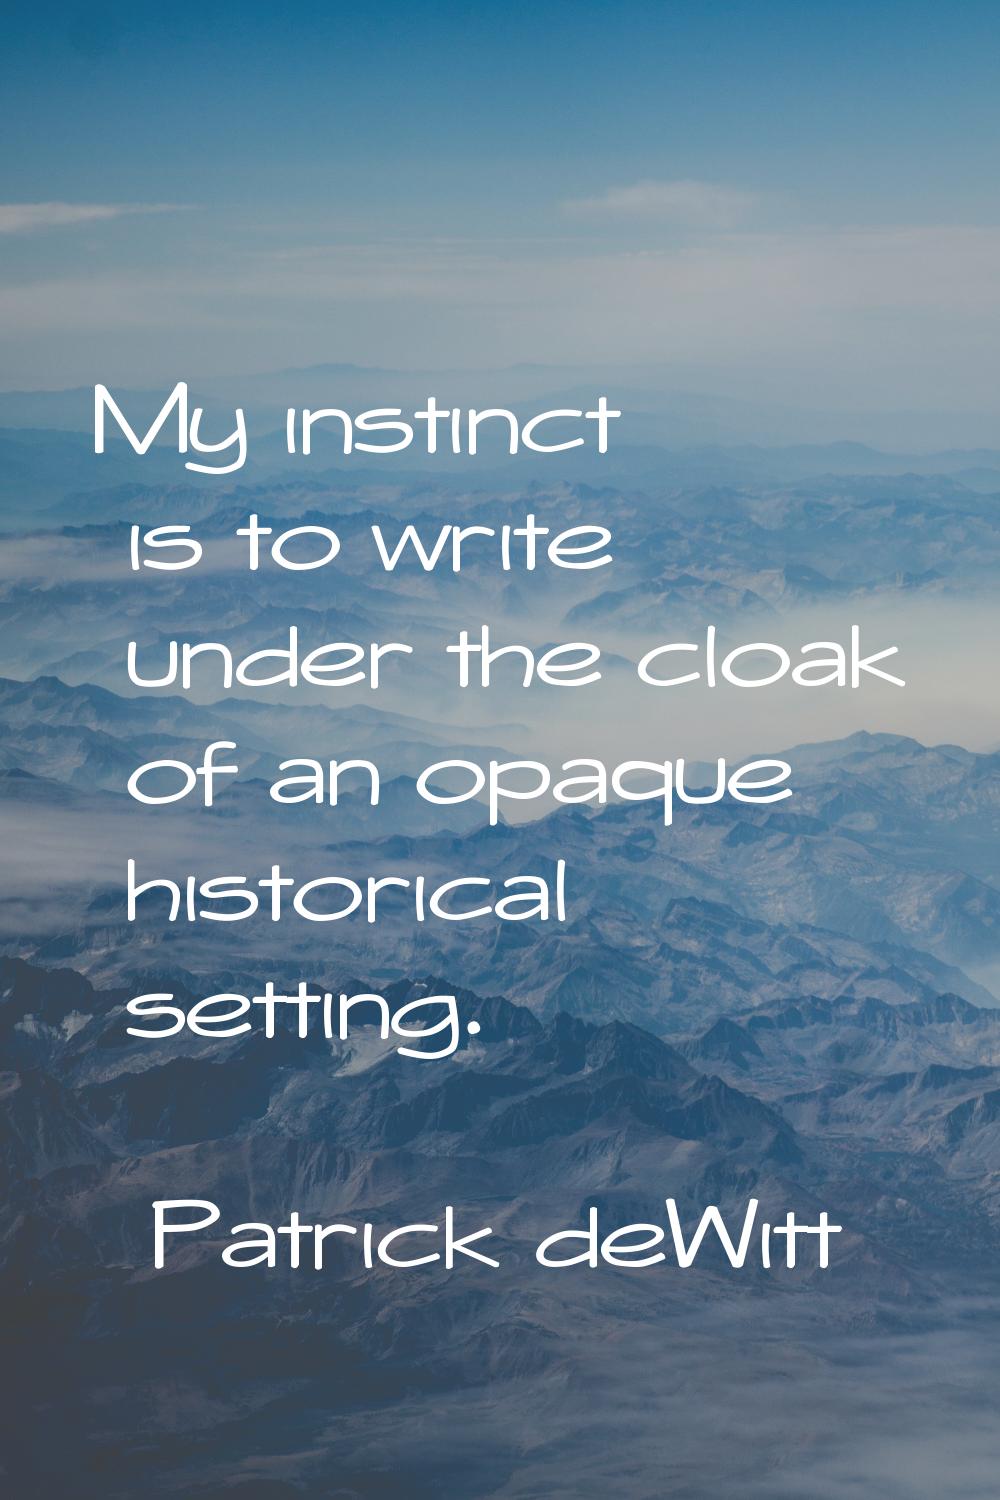 My instinct is to write under the cloak of an opaque historical setting.